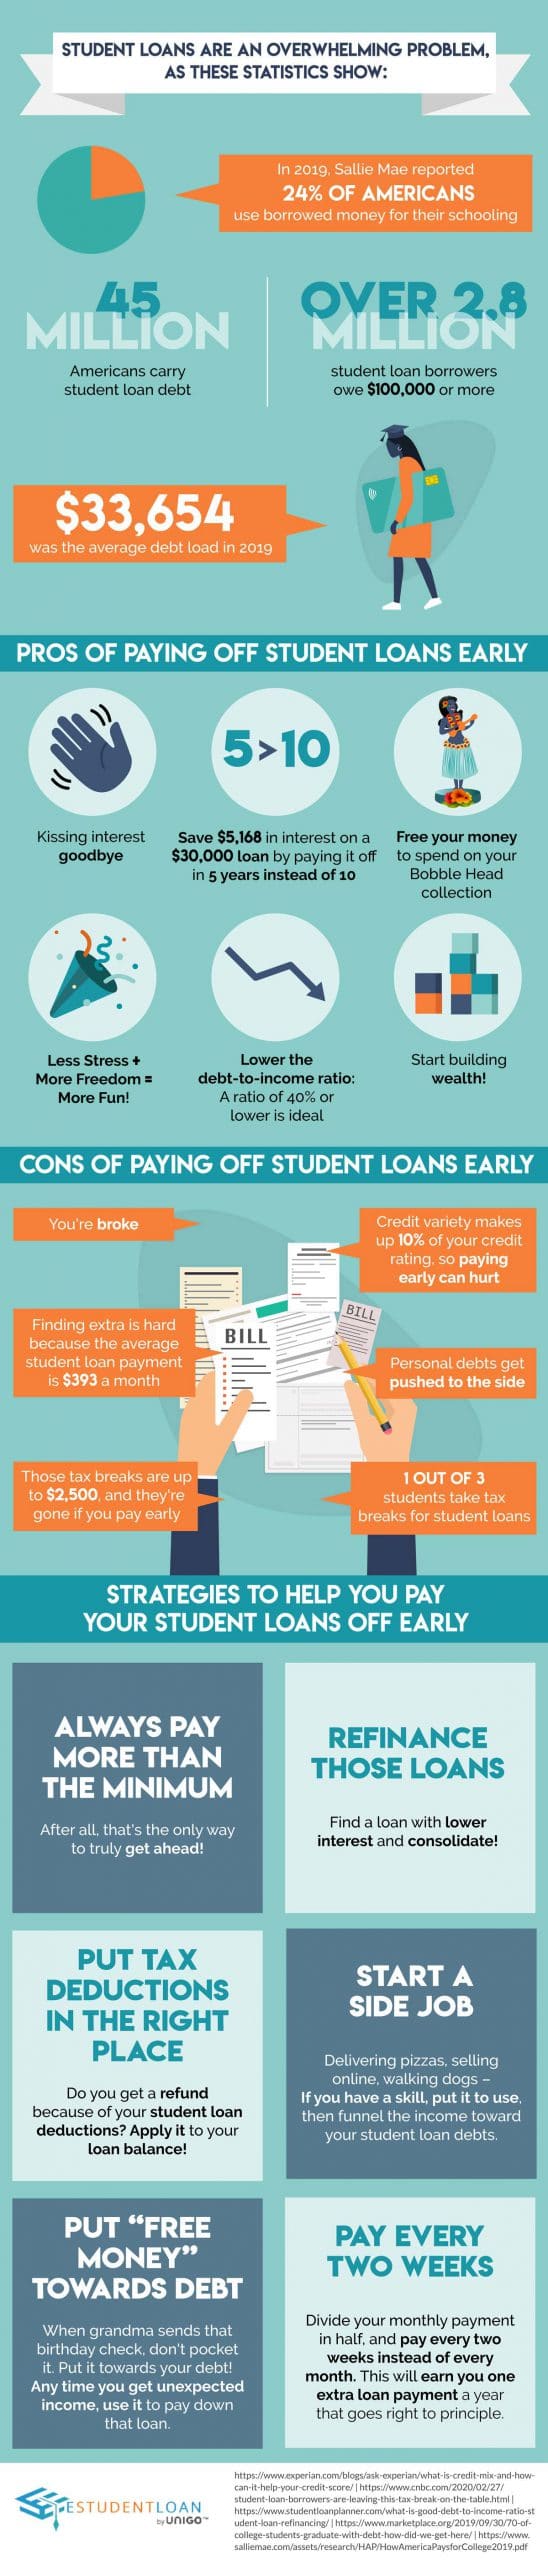 Pros and Cons of Paying Off Student Loans Early